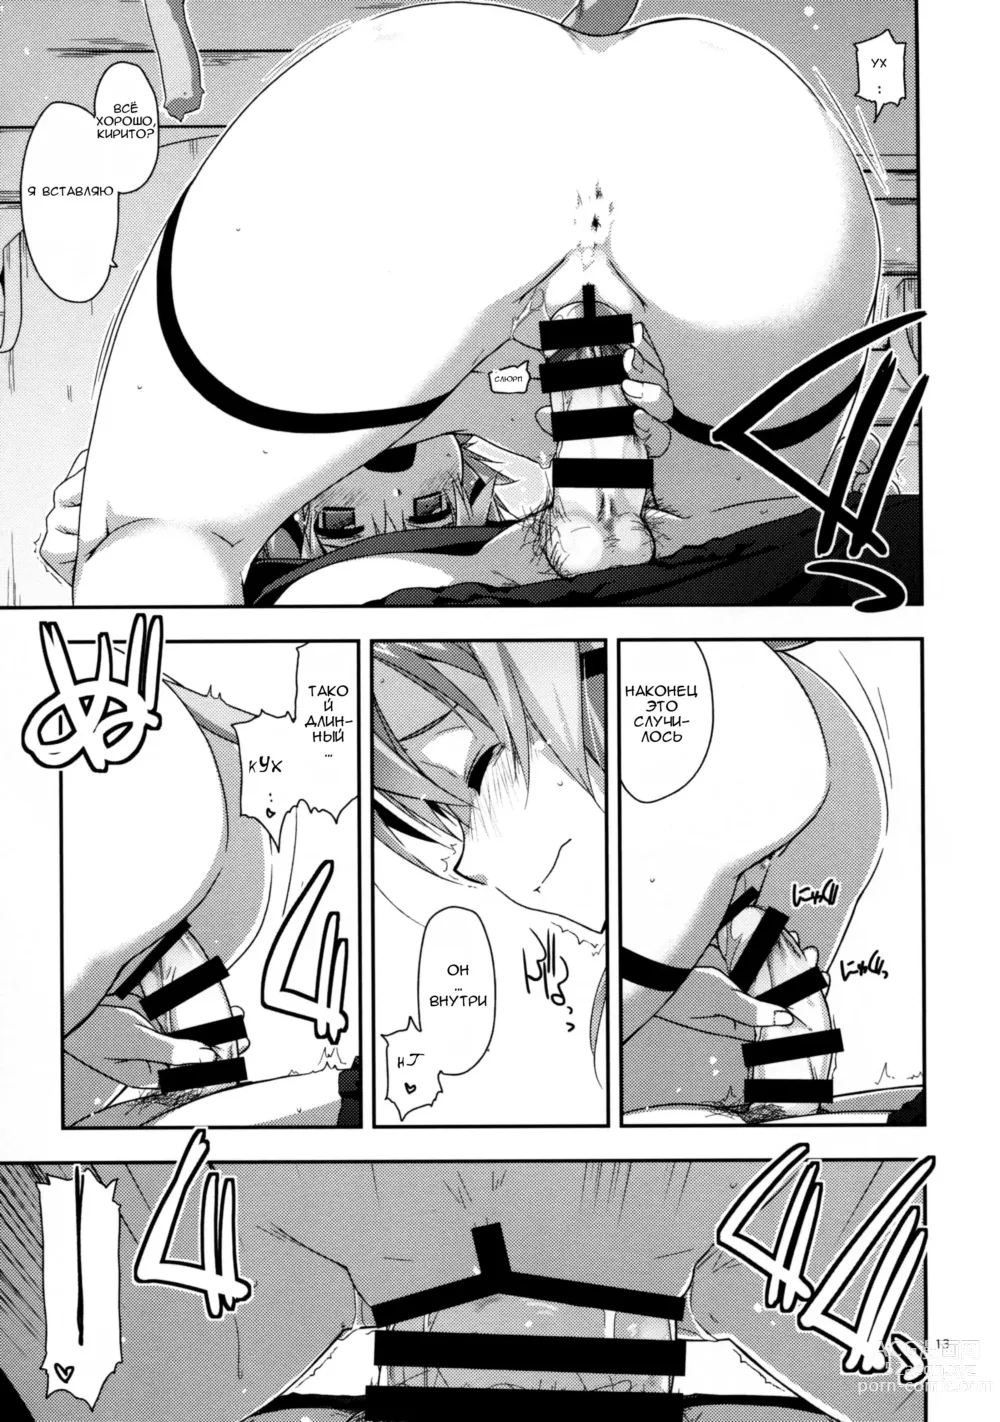 Page 13 of doujinshi Case closed.